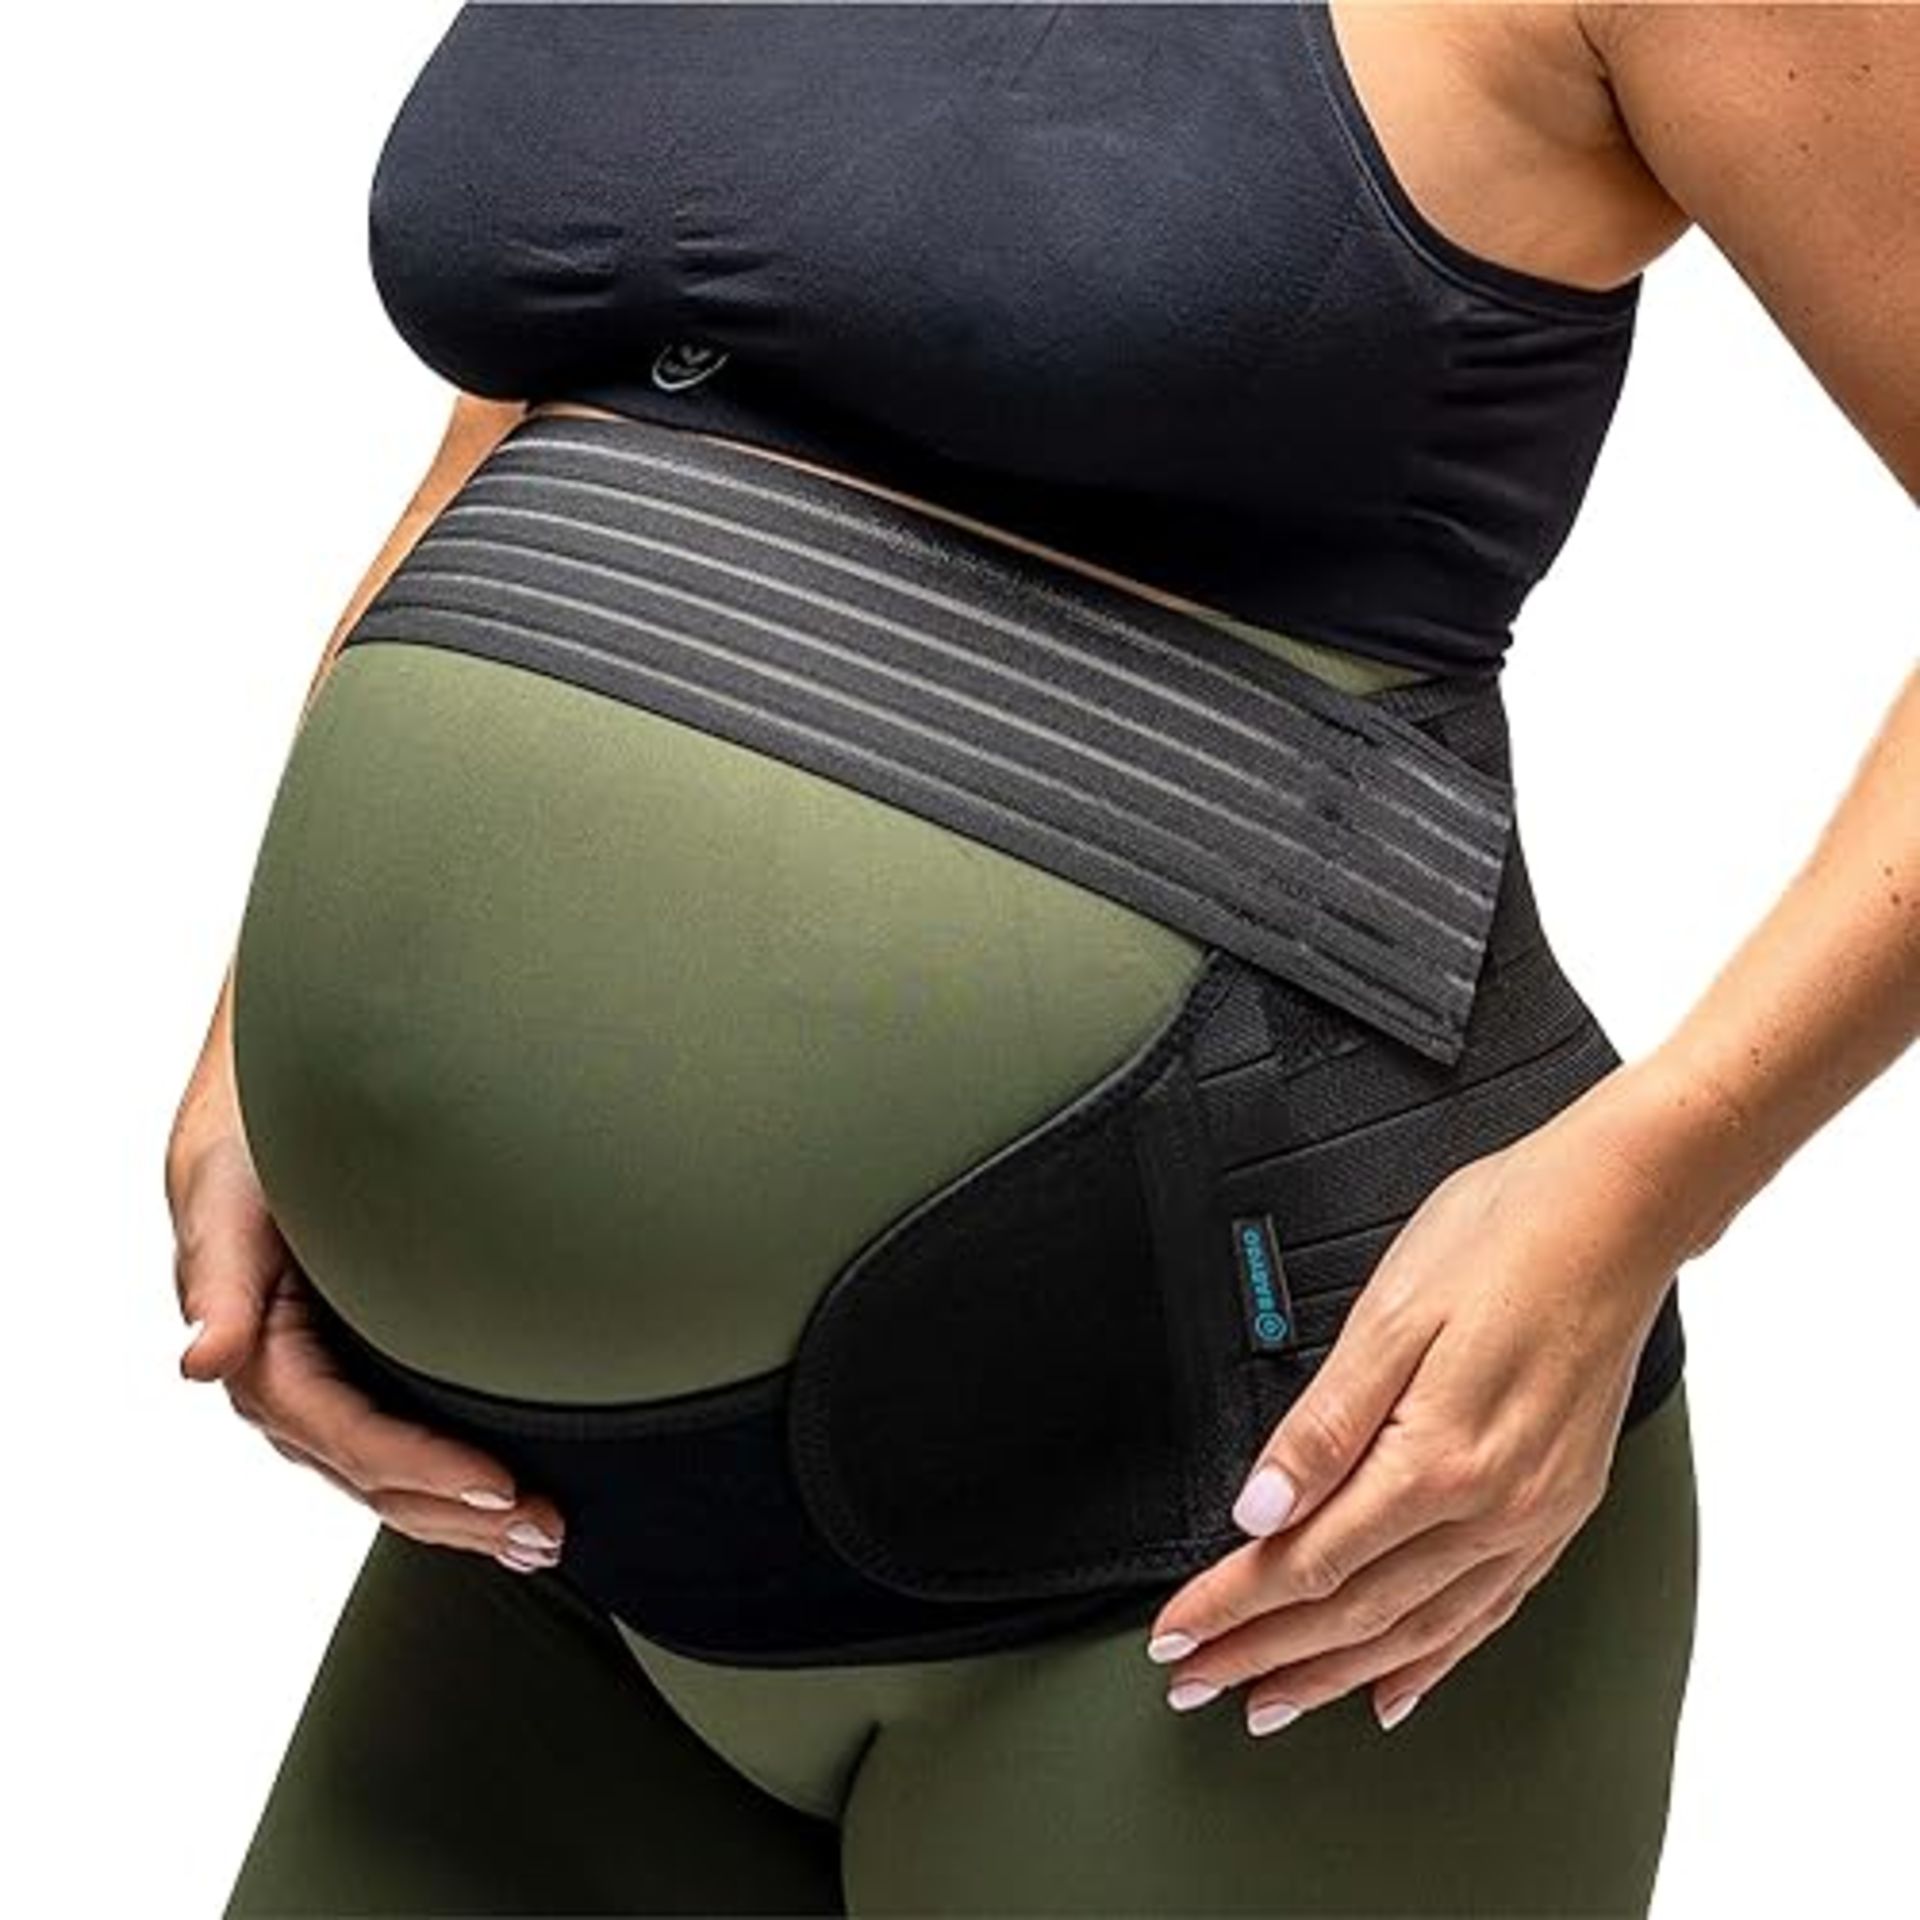 Babygo 4 In 1 Pregnancy Support Belt Maternity & Postpartum Band - Relieve Back, Pelvic, Hip Pain, S